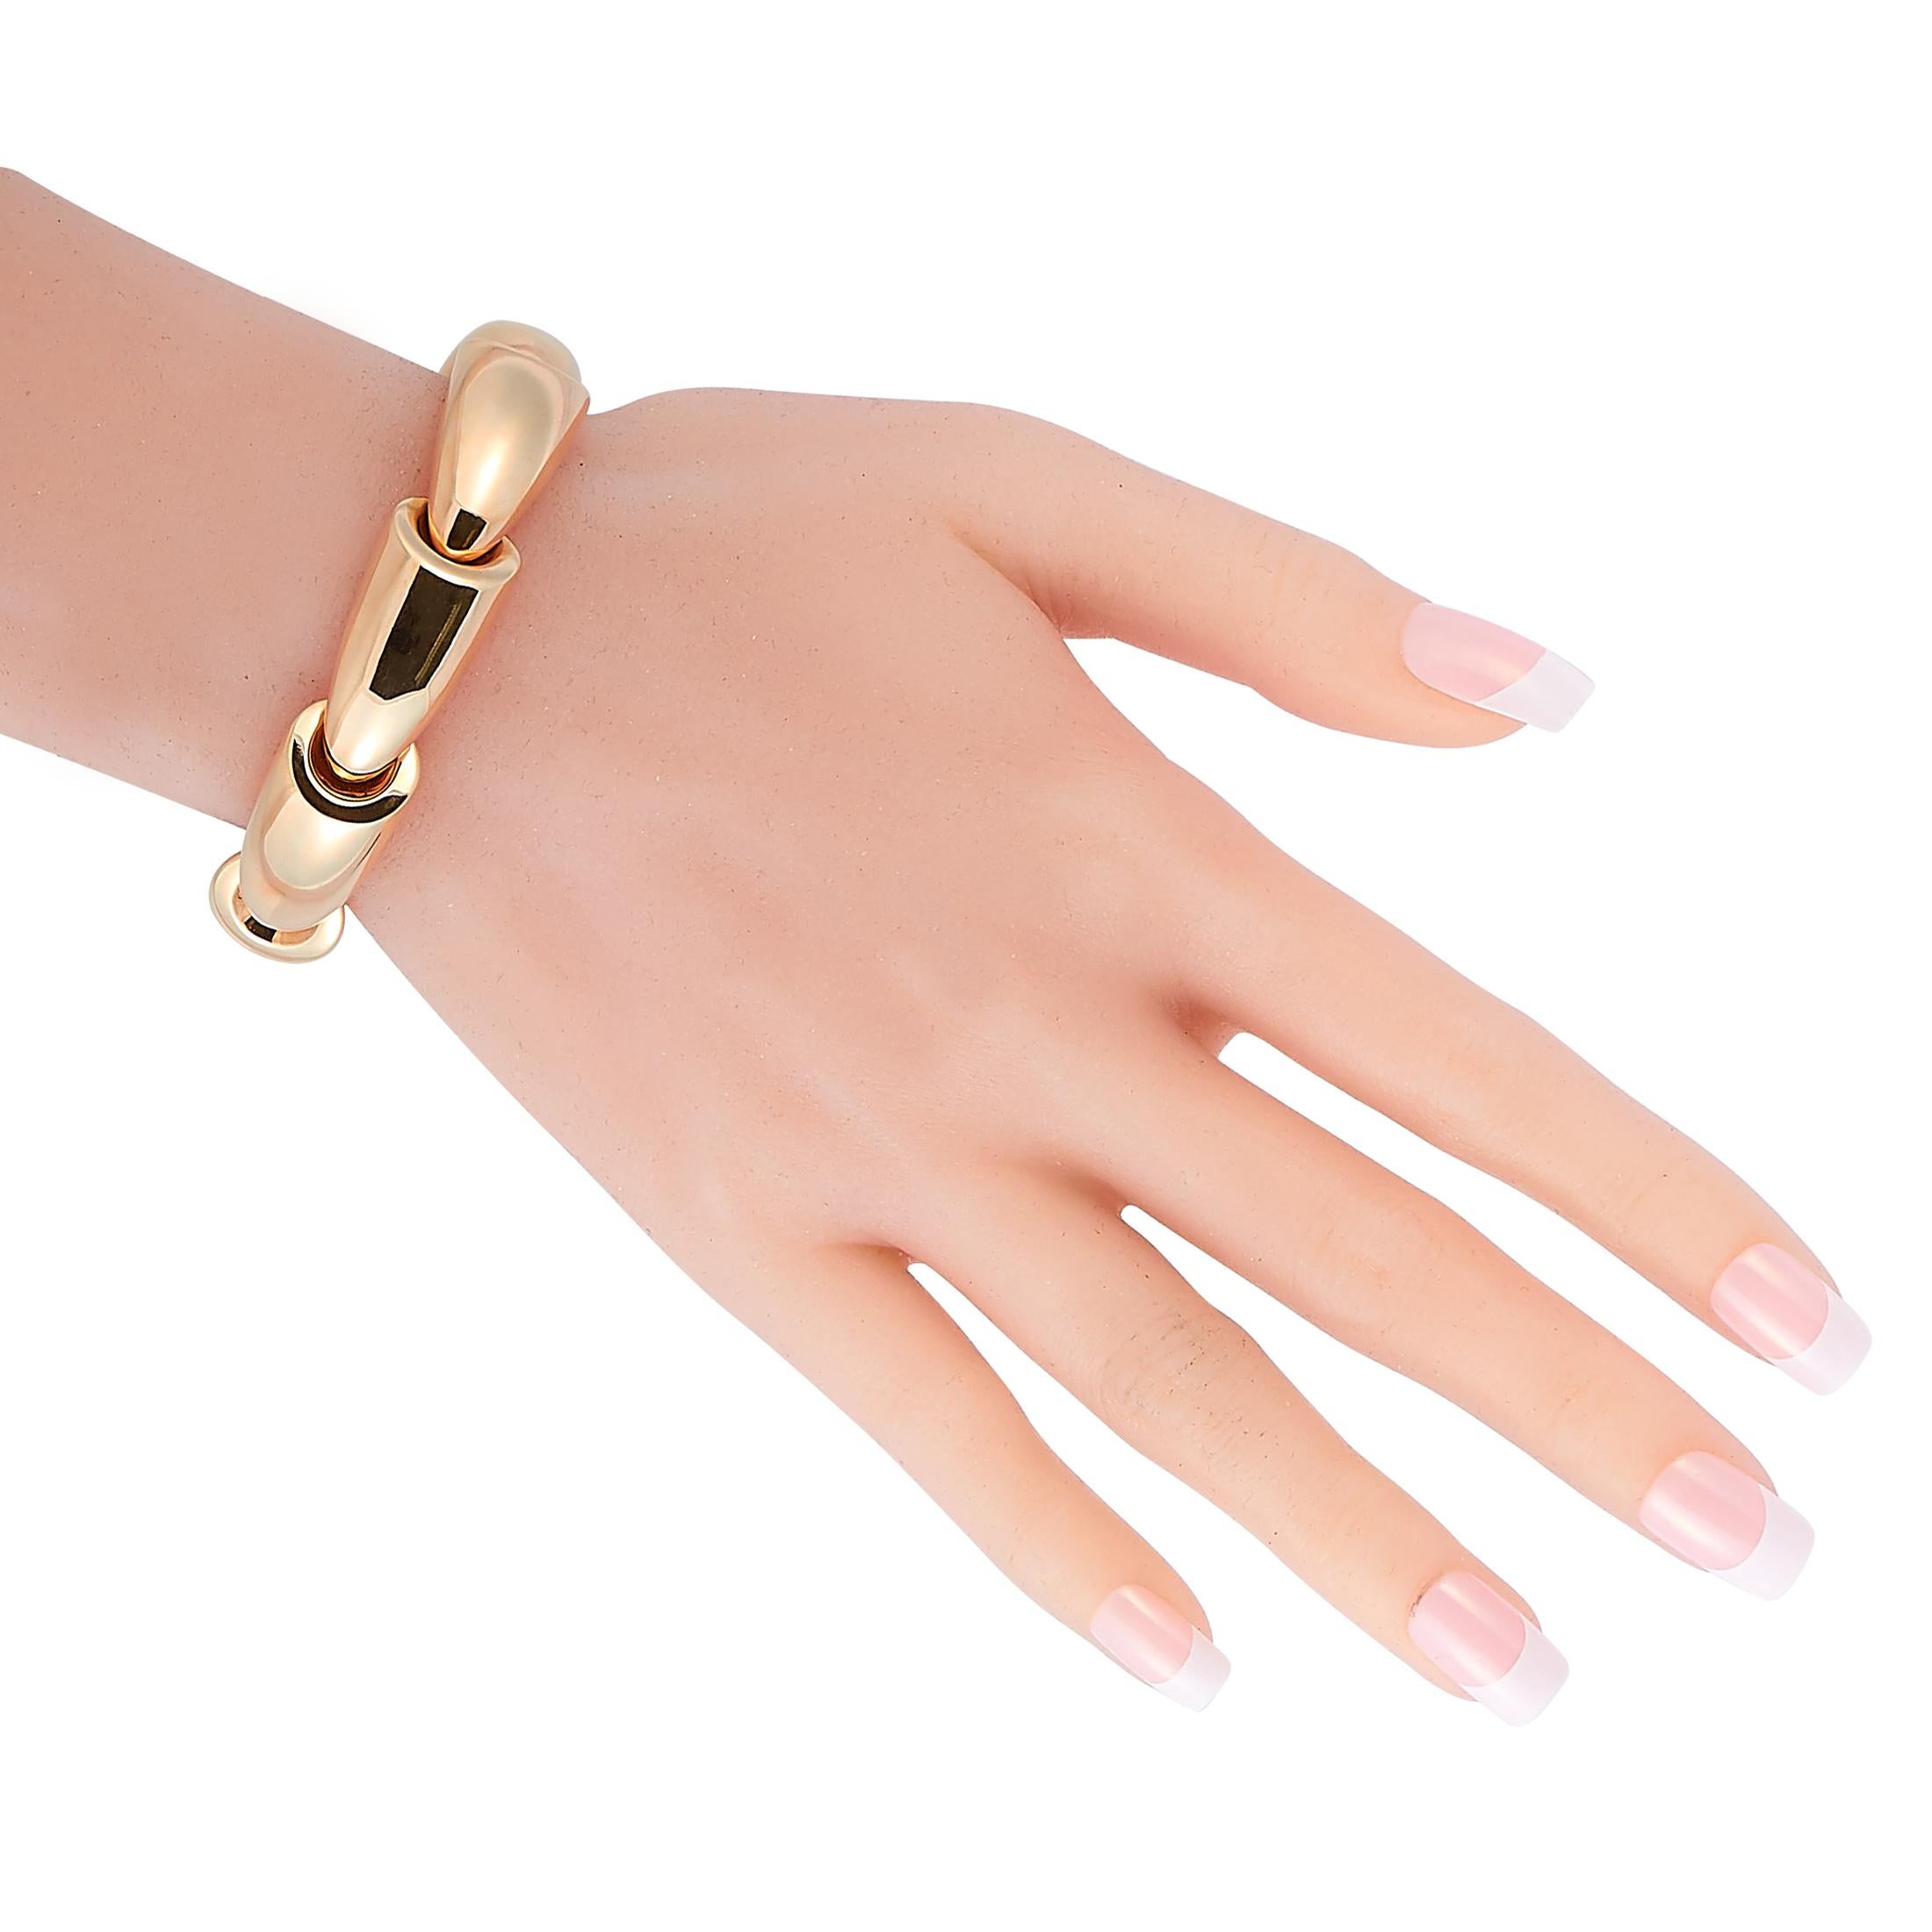 The Vhernier “Calla” bracelet is crafted from 18K rose gold and weighs 59.4 grams, measuring 7” in length.

This jewelry piece is offered in brand new condition and includes the manufacturer’s box.